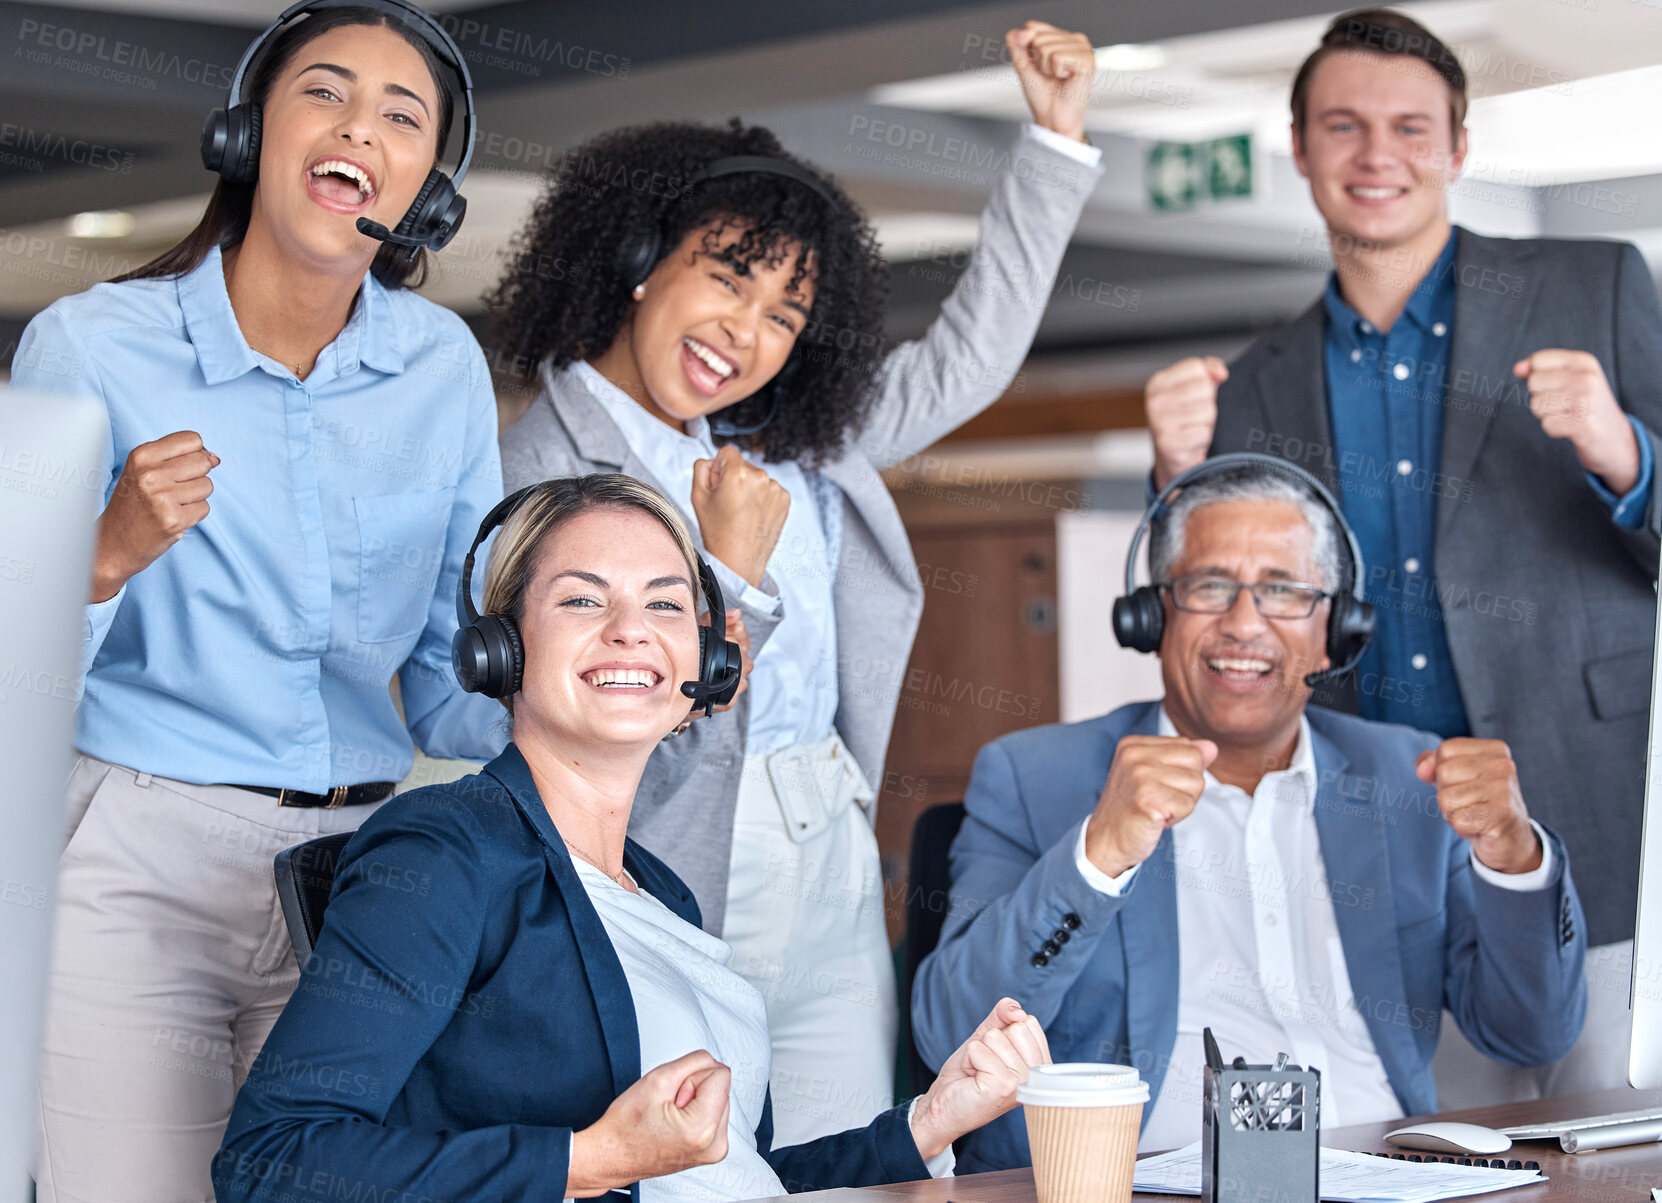 Buy stock photo Call center, team or happy people with success of winning telemarketing sales target or achievement. Teamwork, customer service and group of agents cheering in celebration of victory, goals or deal